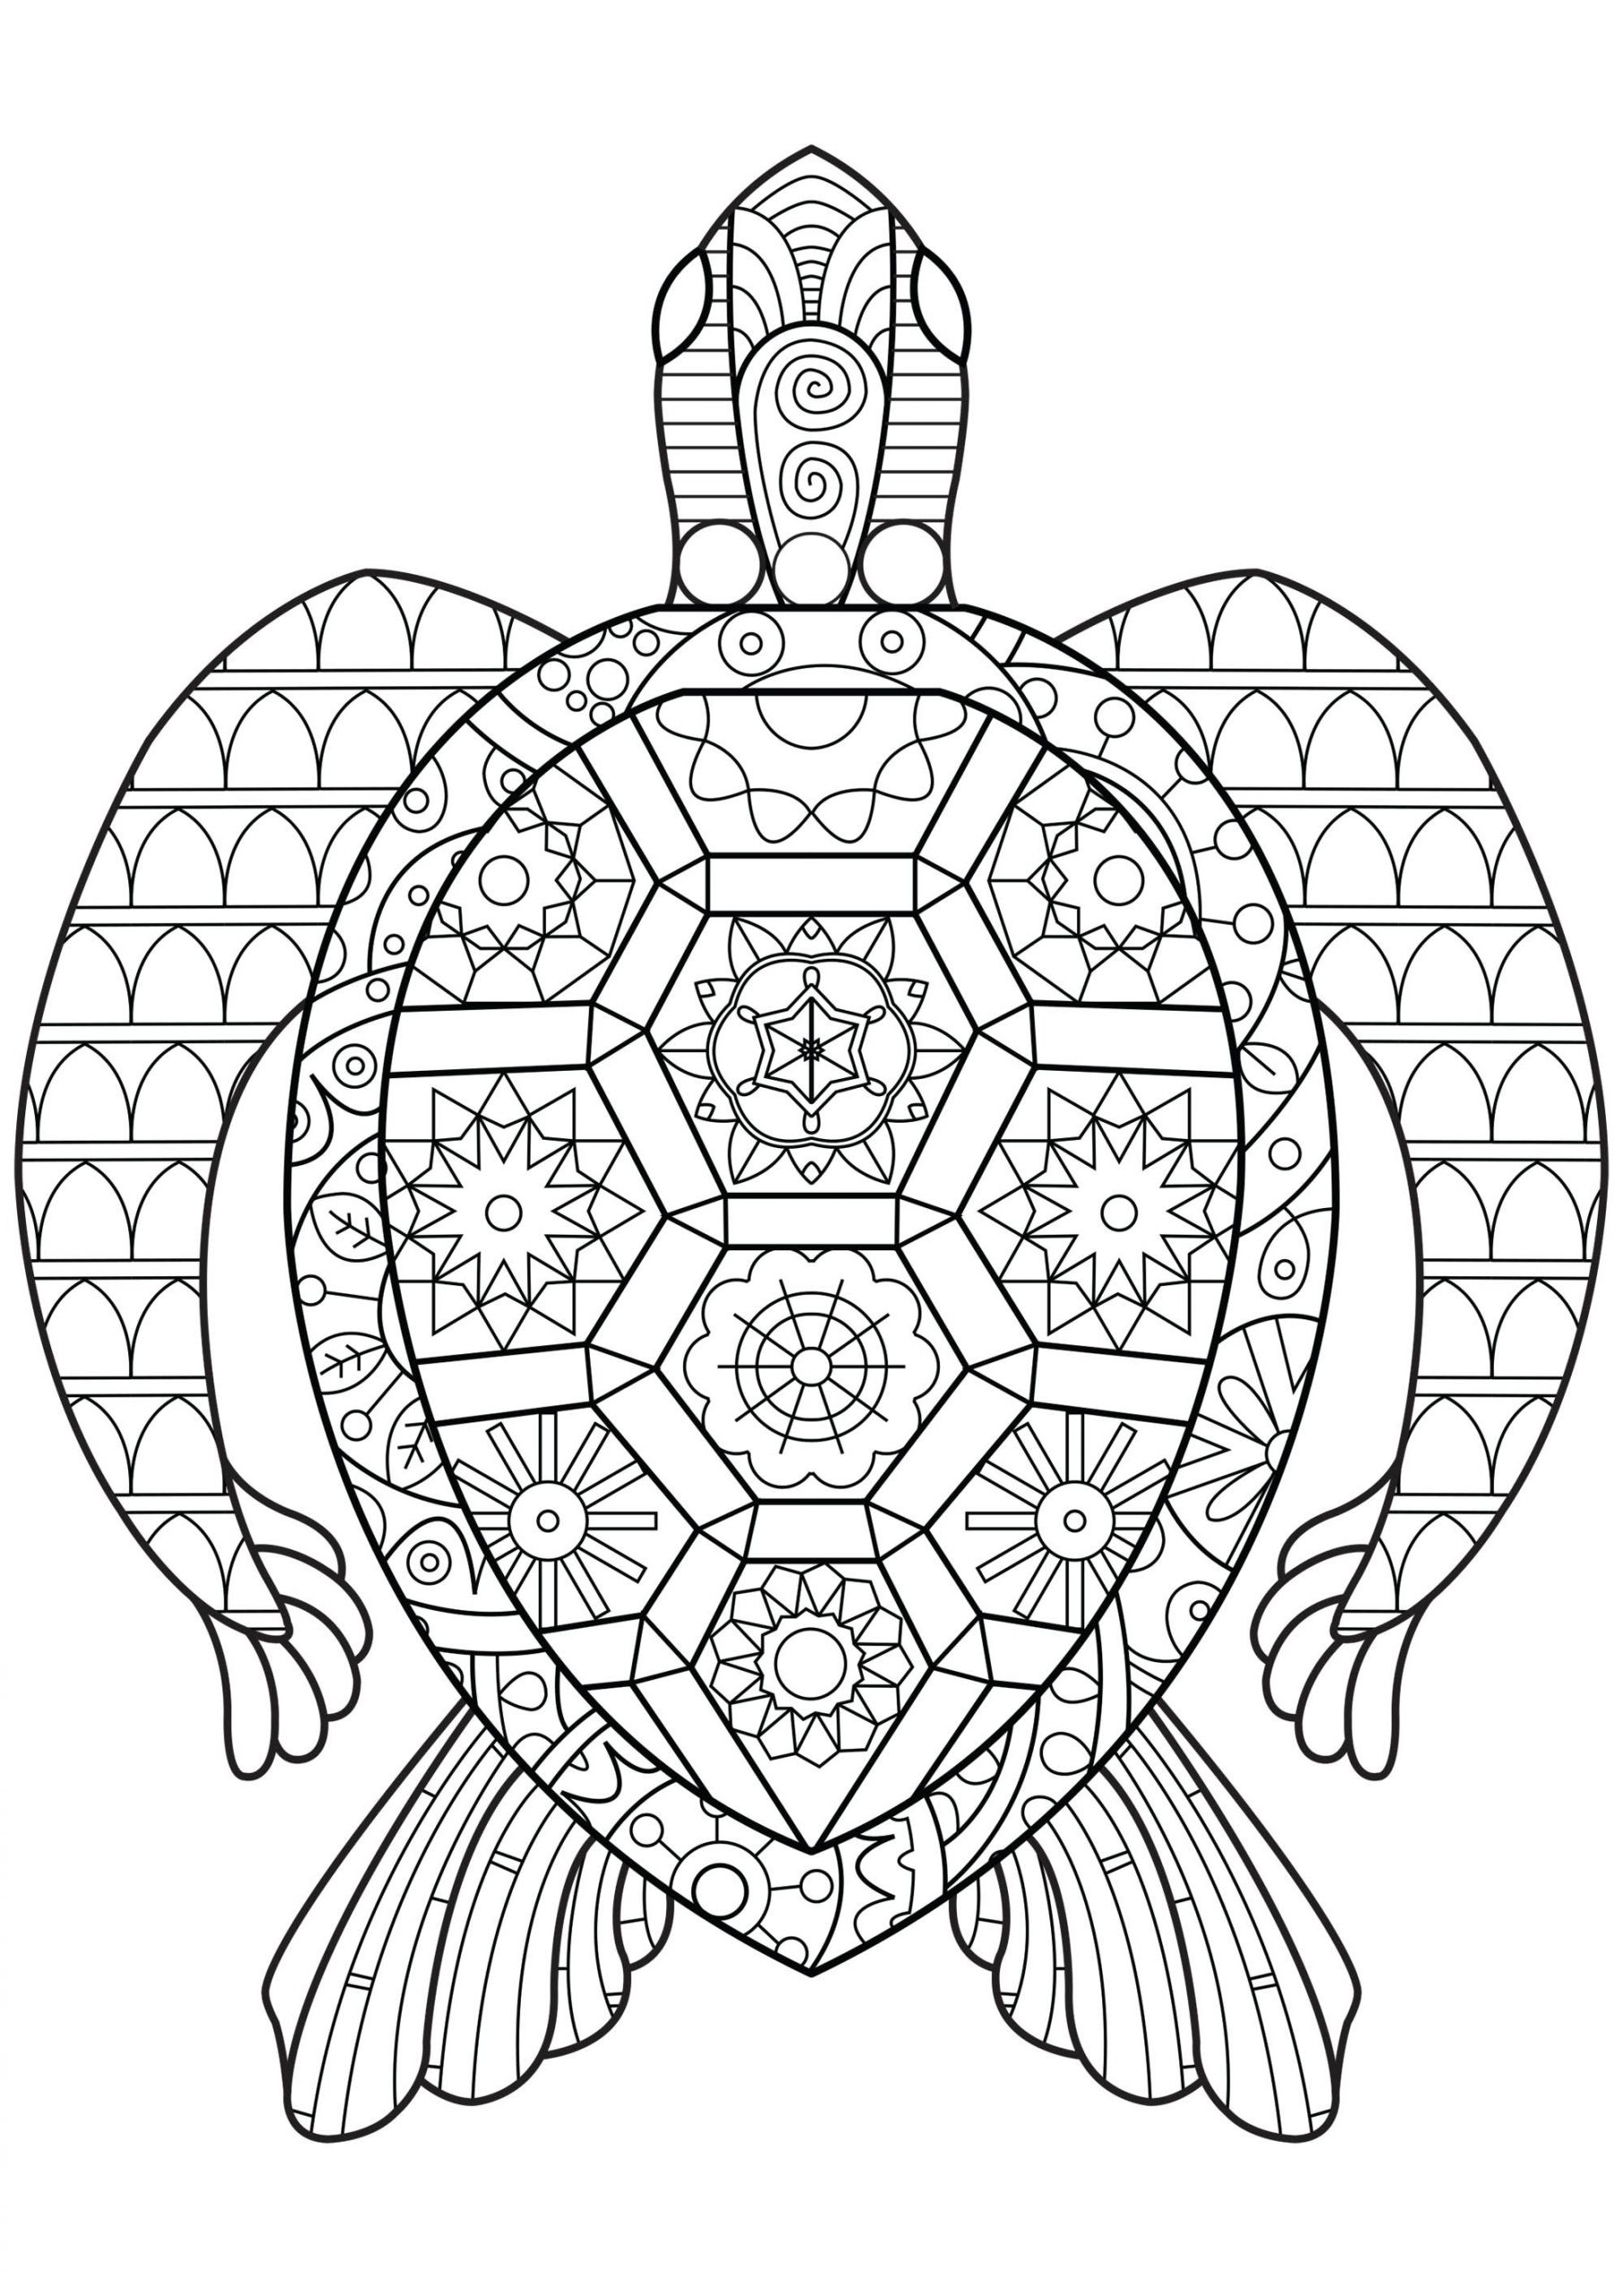 Coloring Sheet For Adults
 Zen Turtle Turtles Adult Coloring Pages